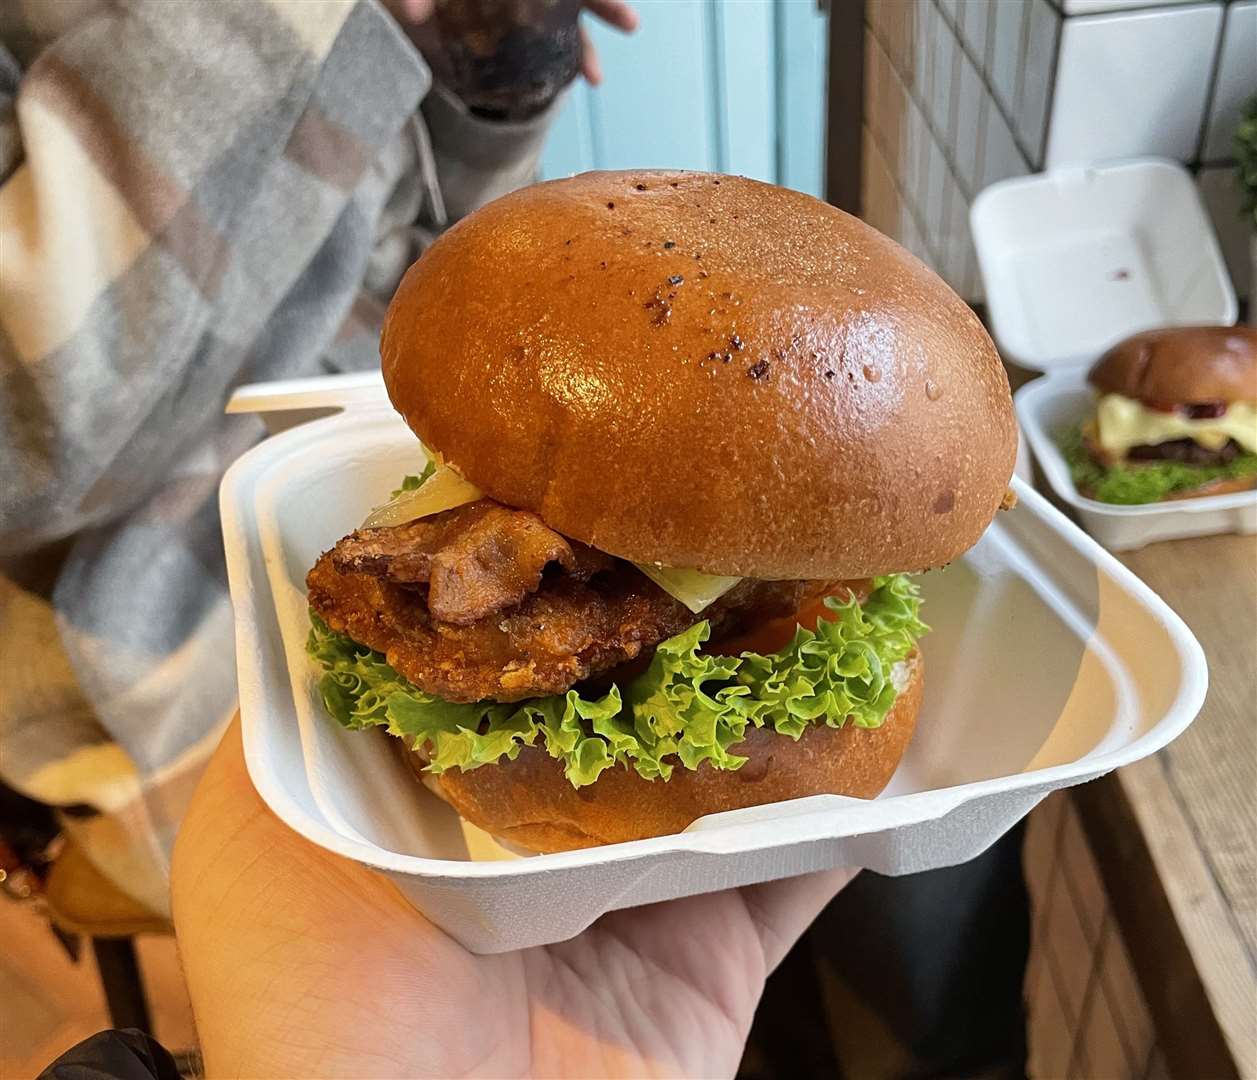 A huge range of burgers are on offer and can be made vegan upon request